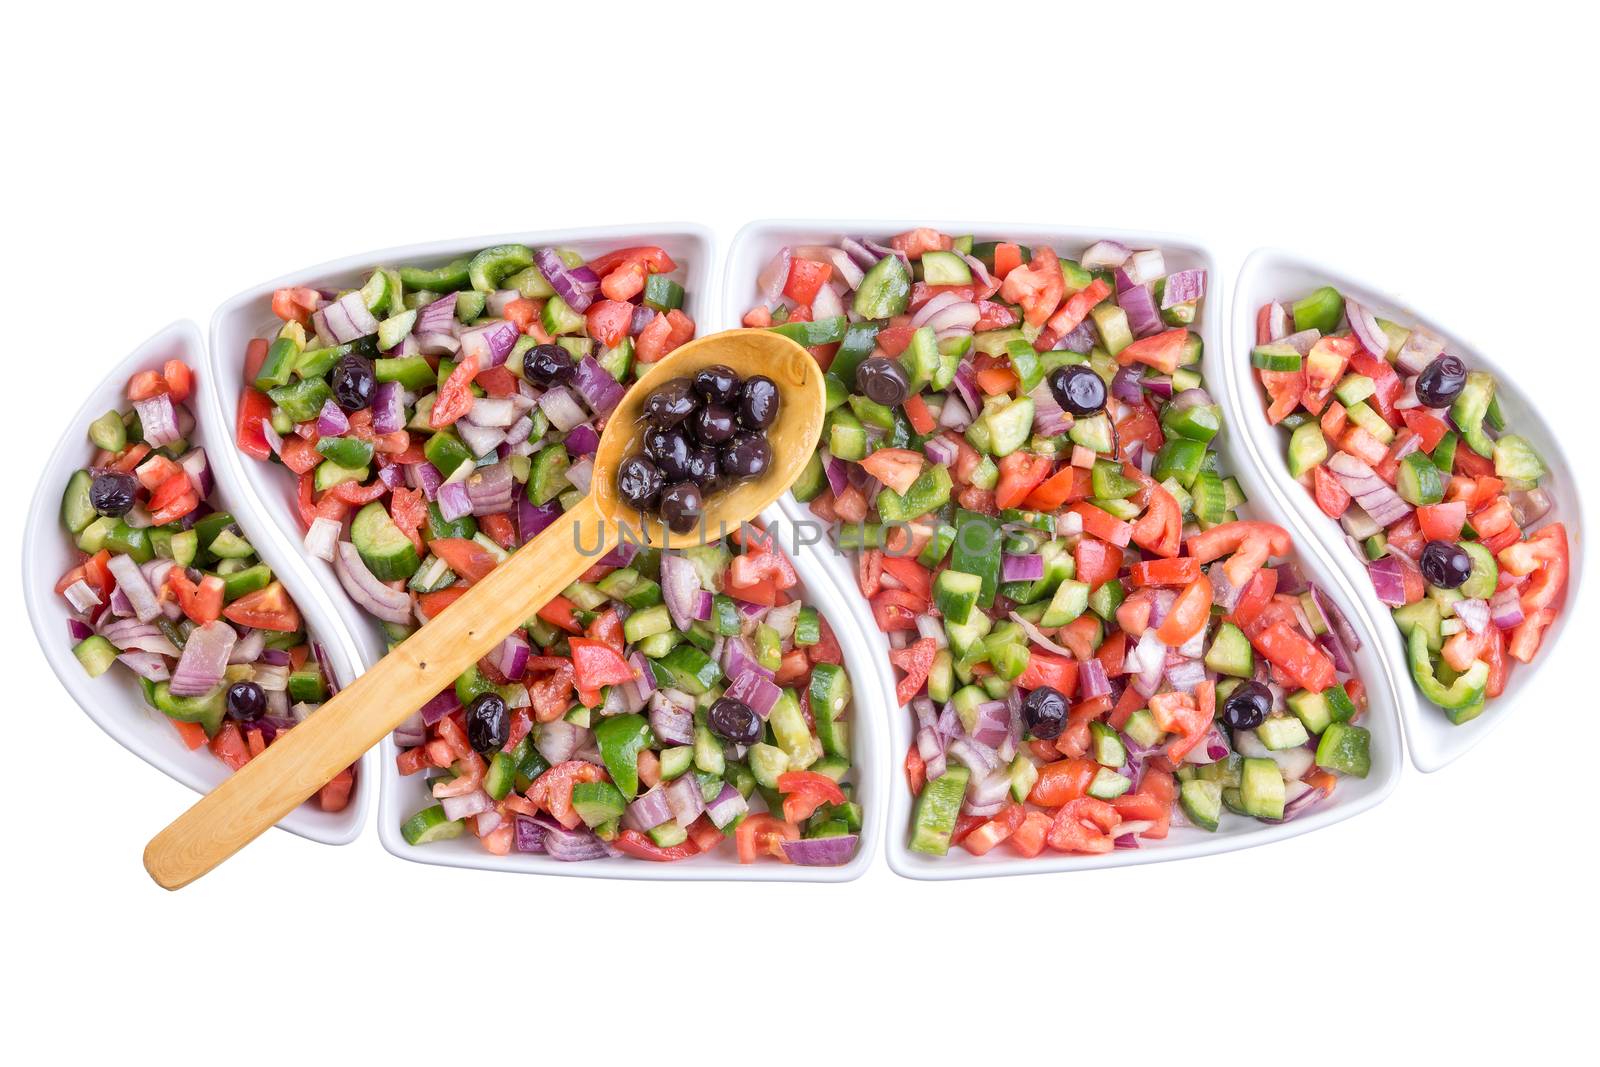 Turkish shepherd salad with colorful diced fresh vegetable served with olives in a long oval platter for a family gathering, overhead view isolated on white